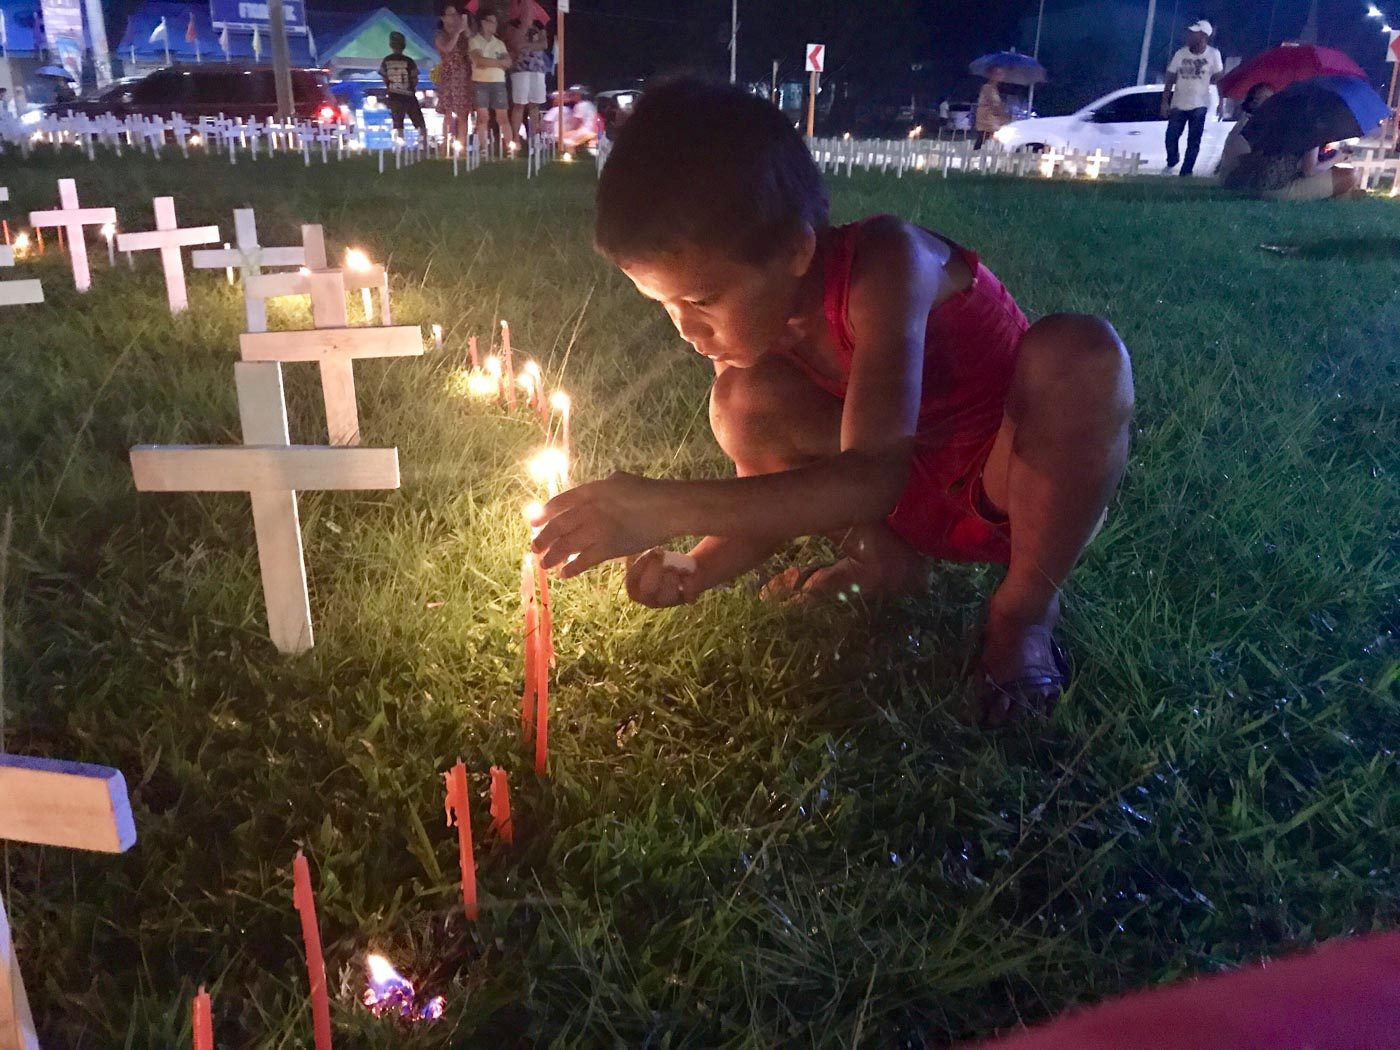 REMEMBERING. A child lights a candle to remember those who died during the disaster. Photo by Jene-Anne Pangue  